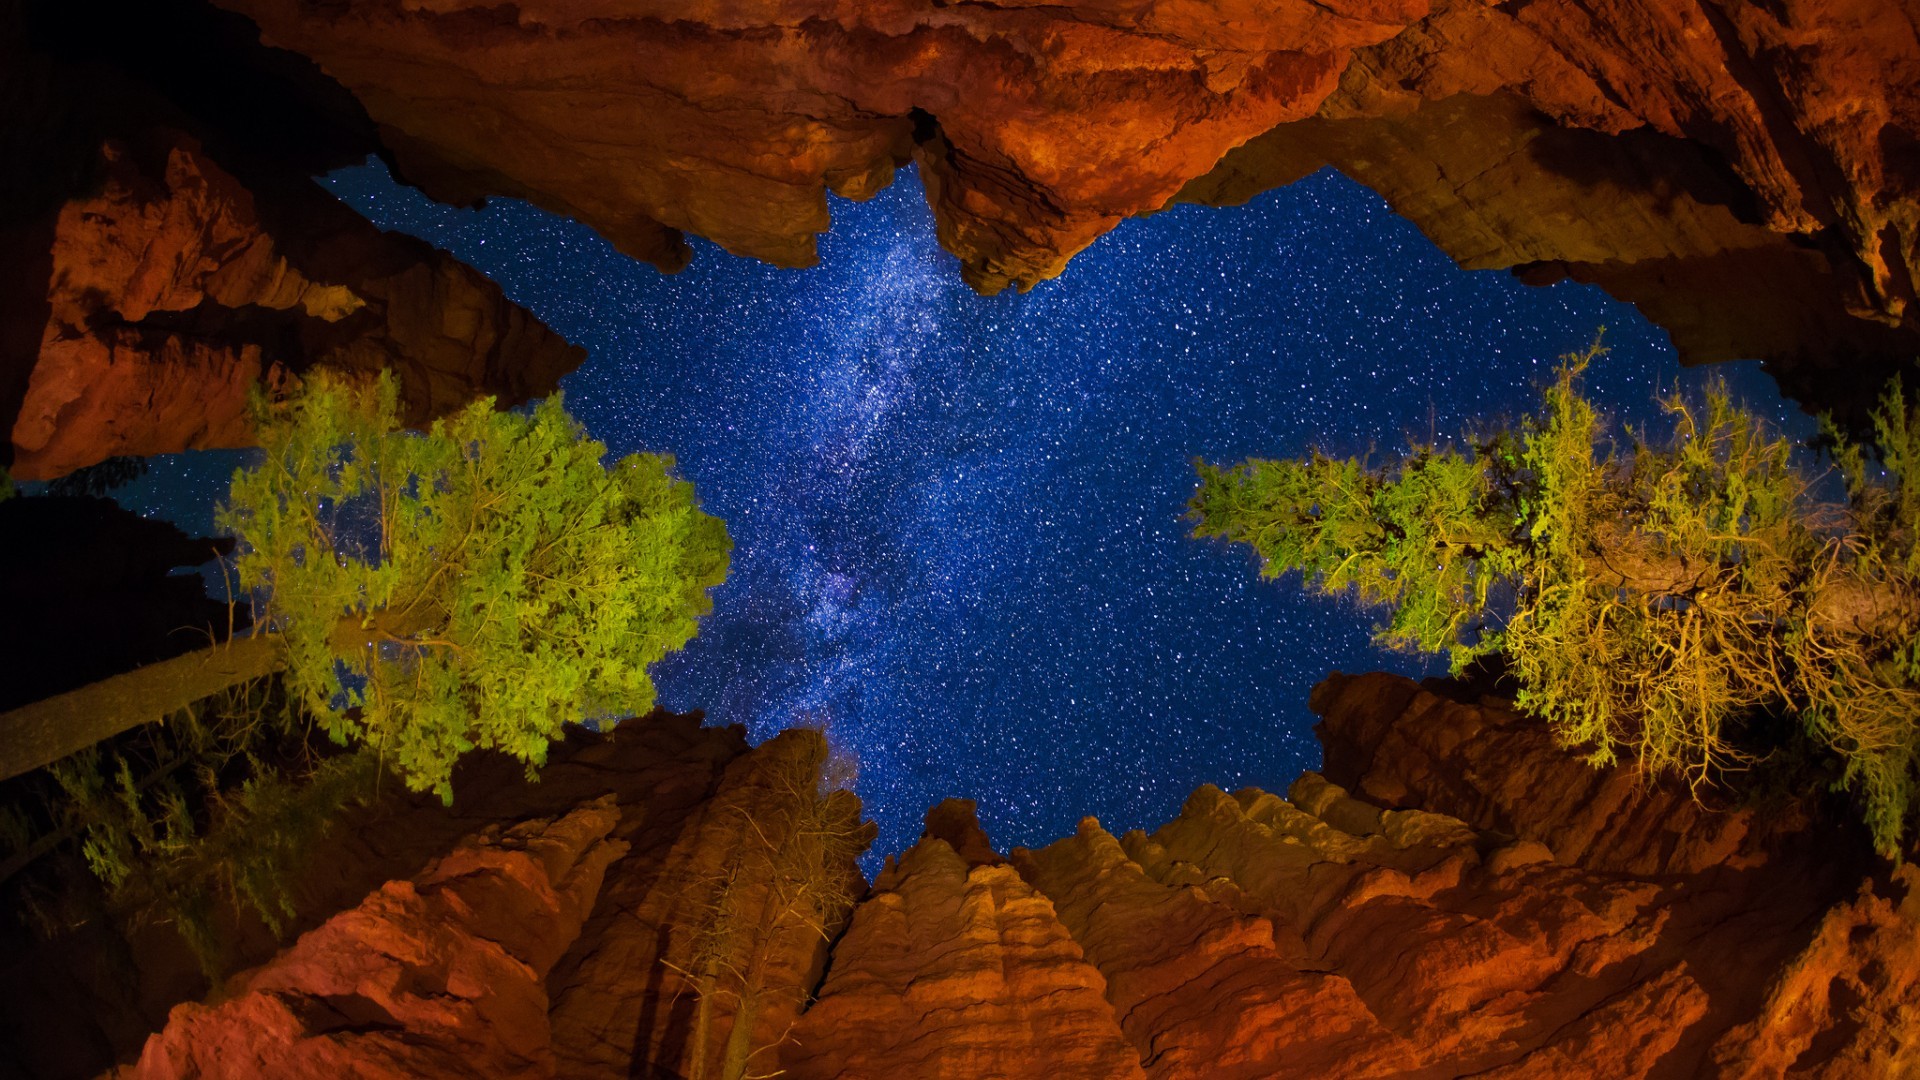 Worms Eye View Clouds Nature Night Sky Stars Milky Way National Park Utah USA Trees Mountains Rock V 1920x1080